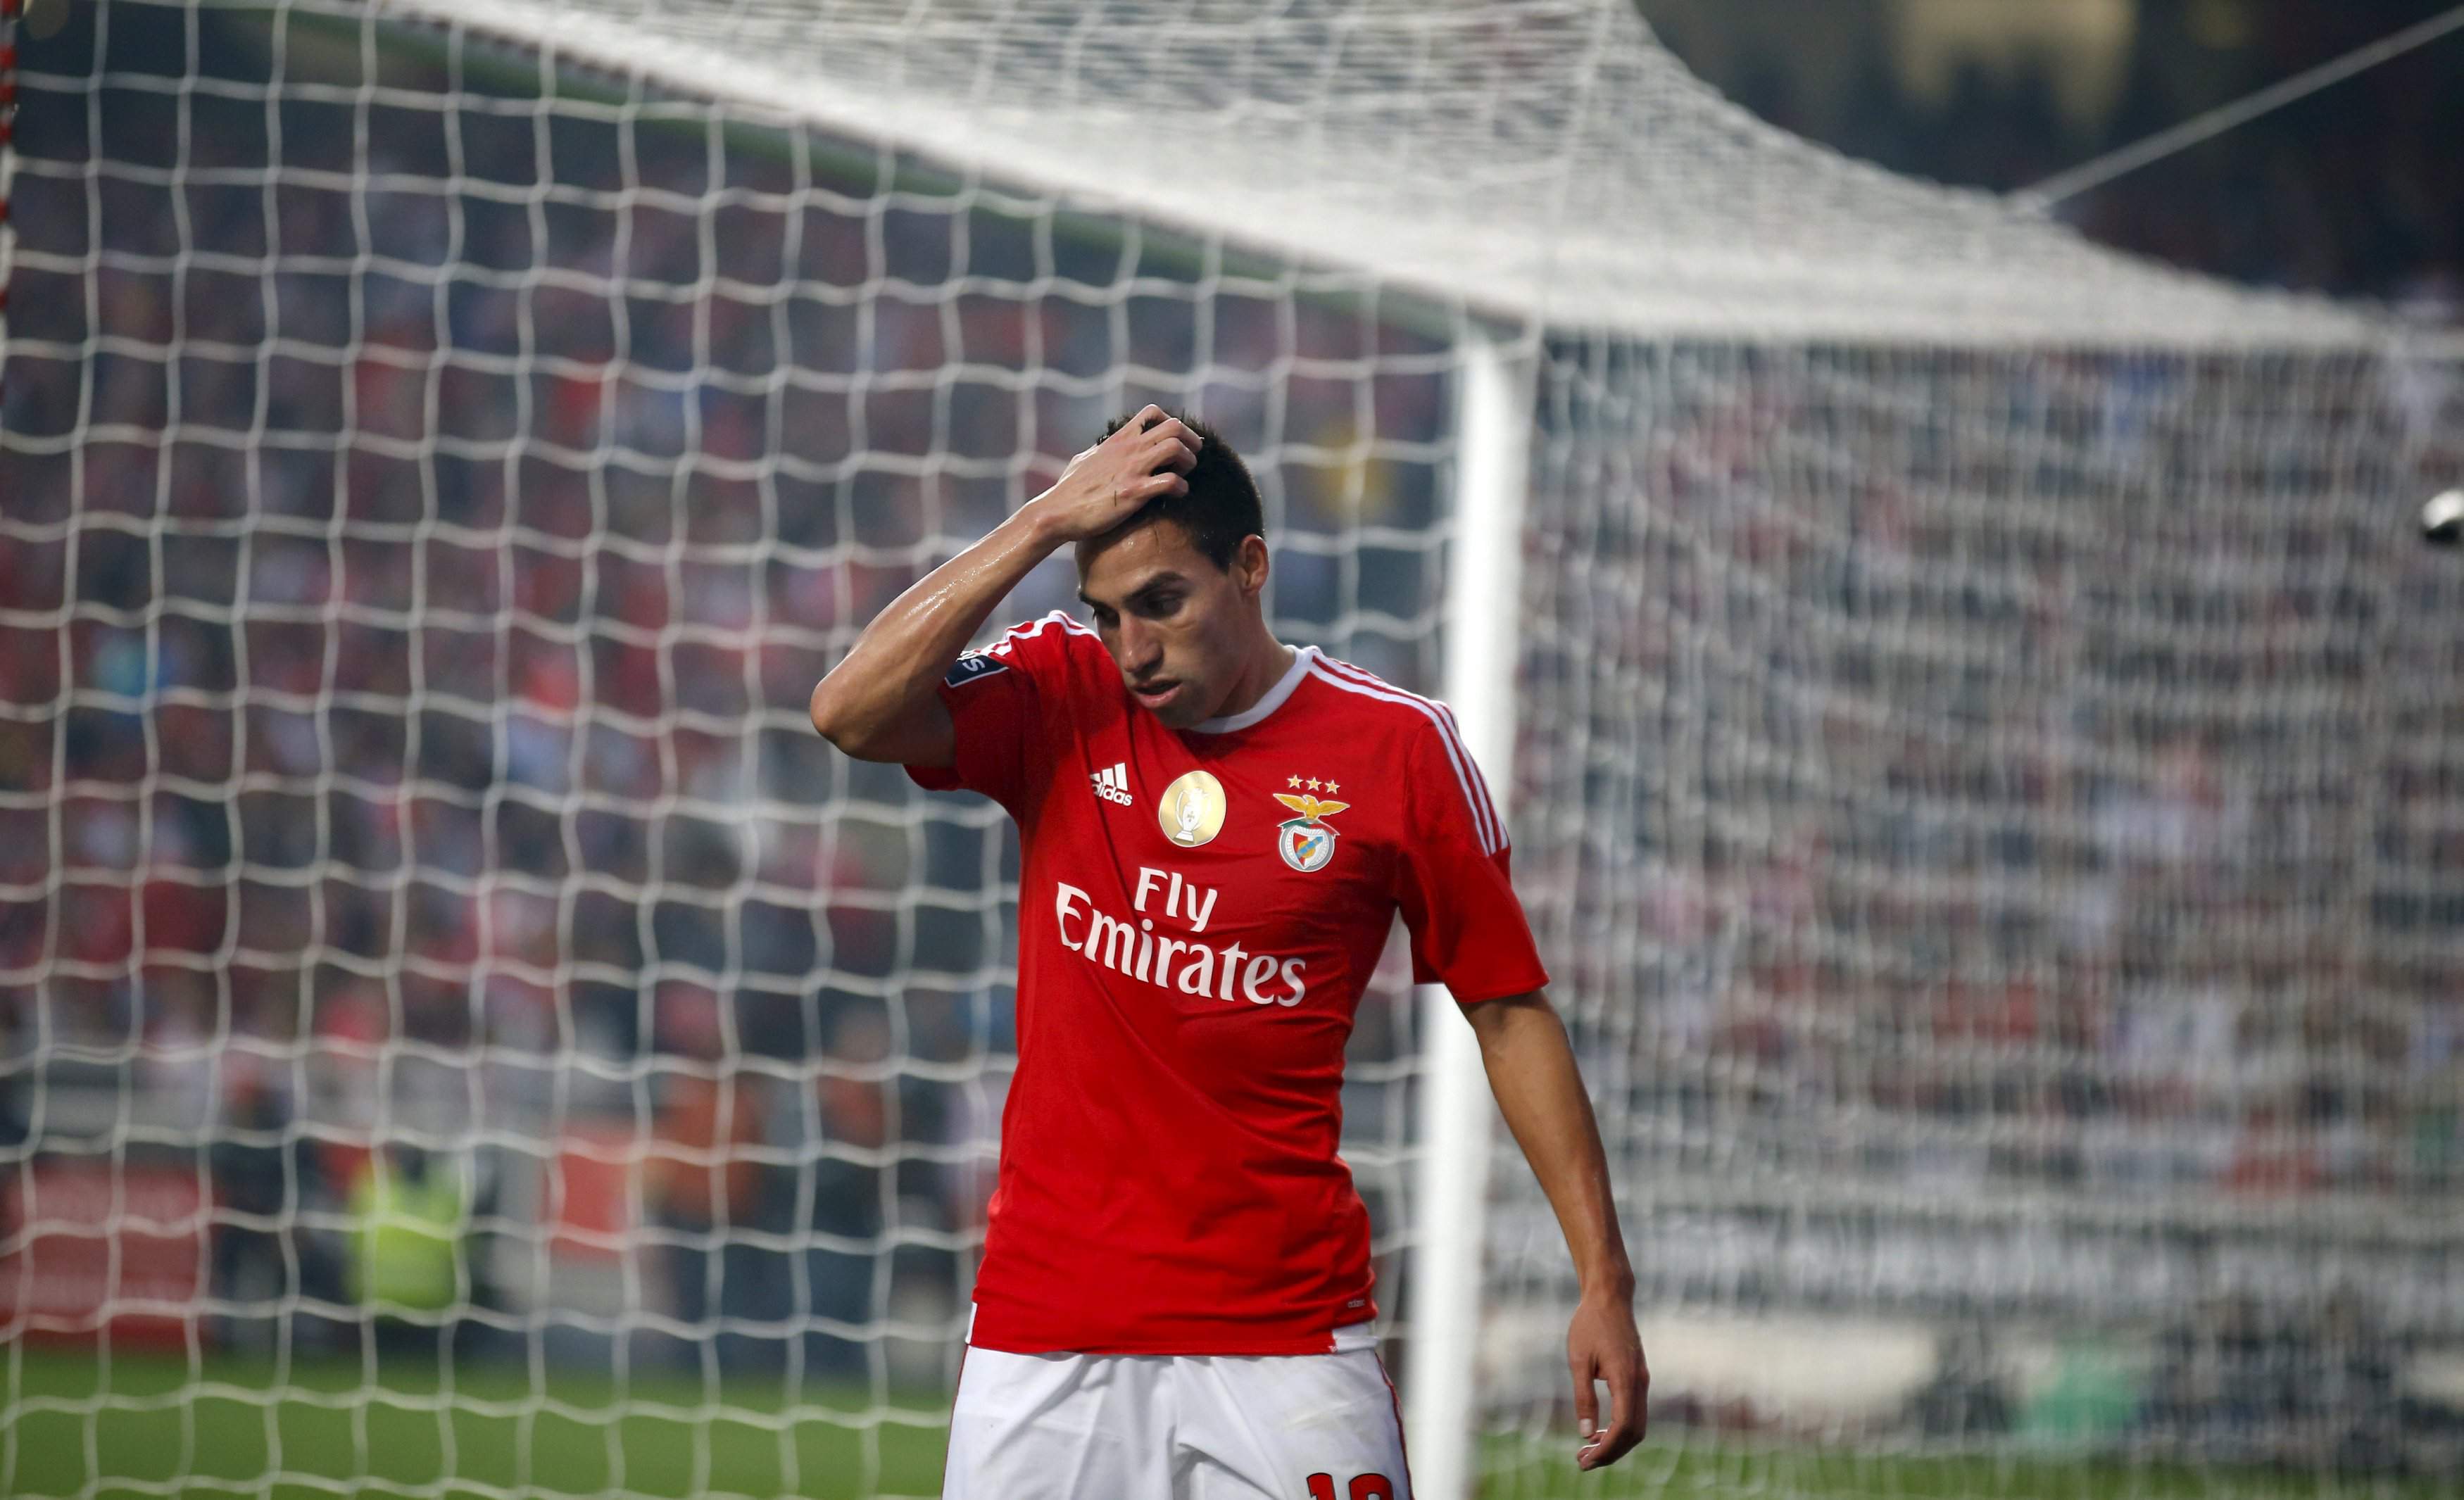 Benfica's Nico Gaitan reacts after missing a scoring opportunity against Sporting during their Portuguese premier league soccer match at Luz stadium in Lisbon, Portugal, October 25, 2015.  REUTERS/Rafael Marchante